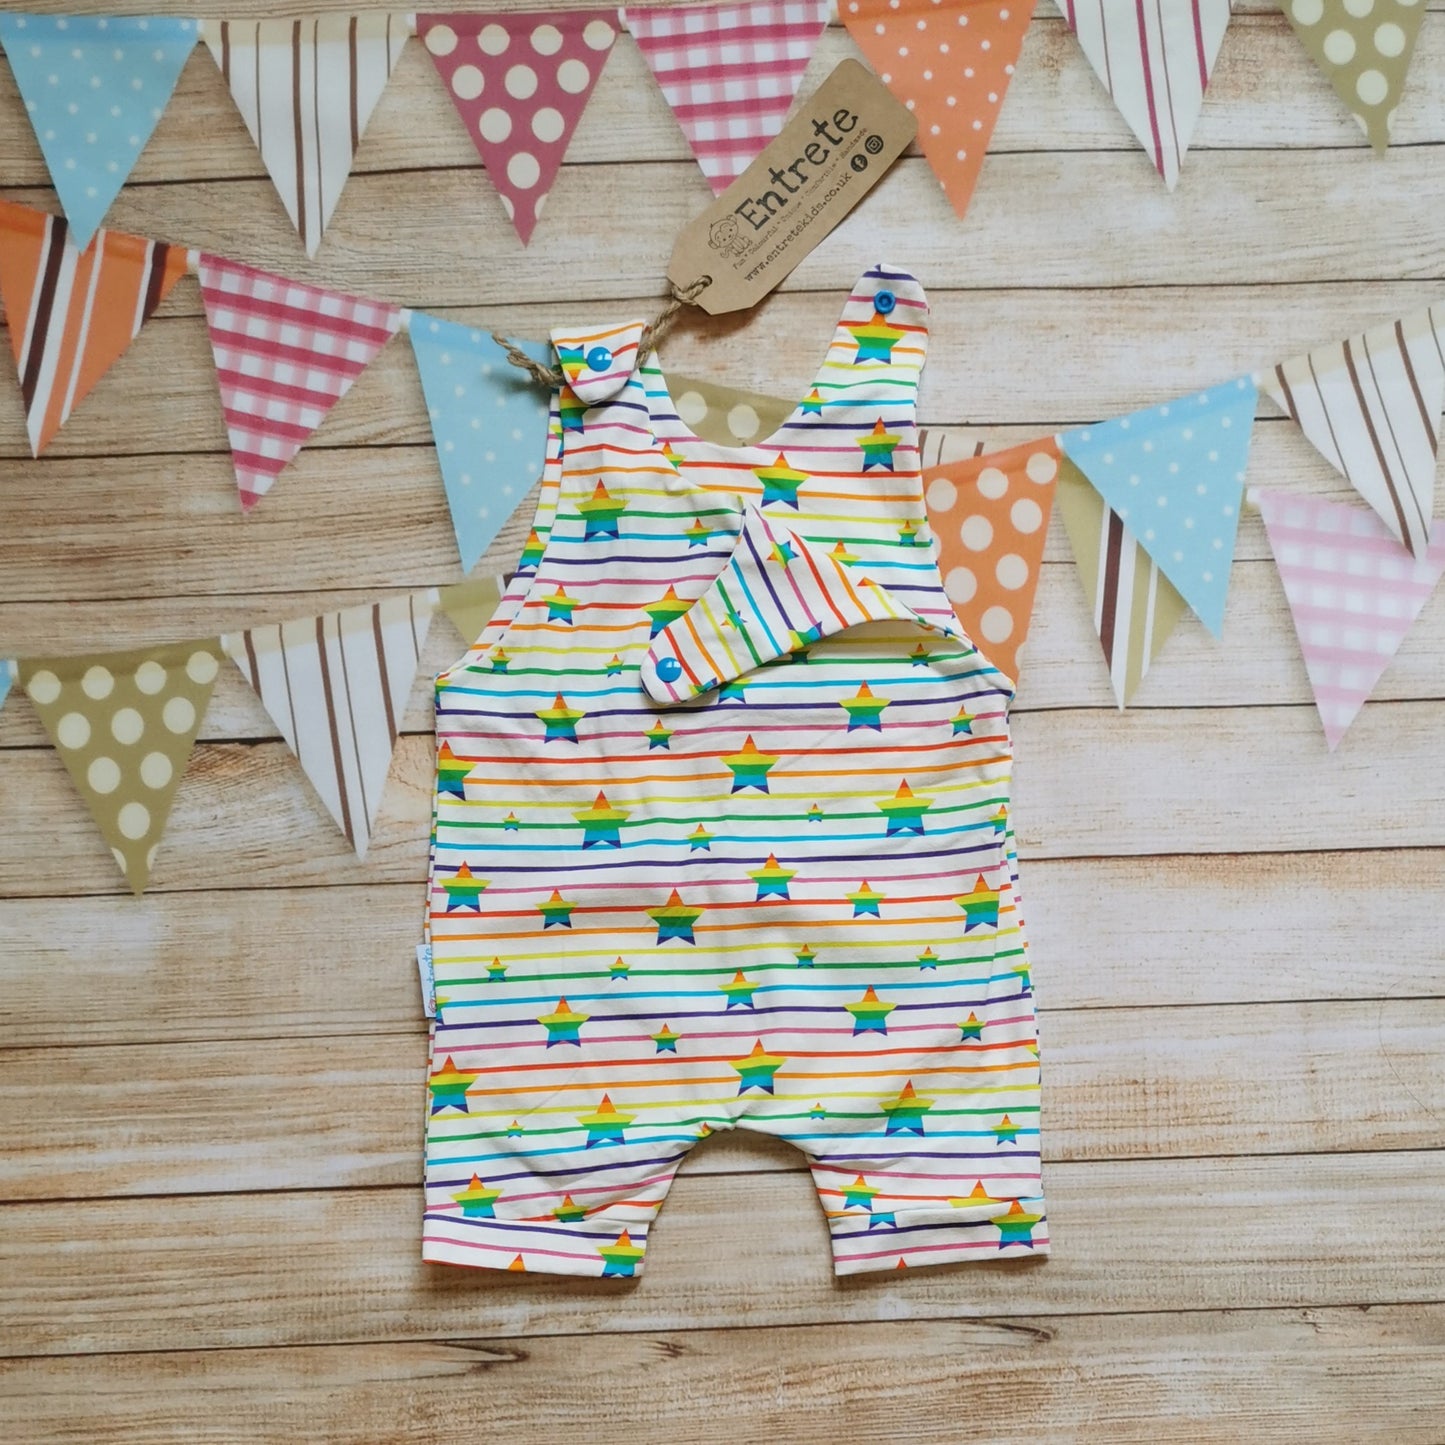 Unisex kids romper shorts, handmade using stunning rainbow stars cotton jersey. Shown with one of the shoulders open.